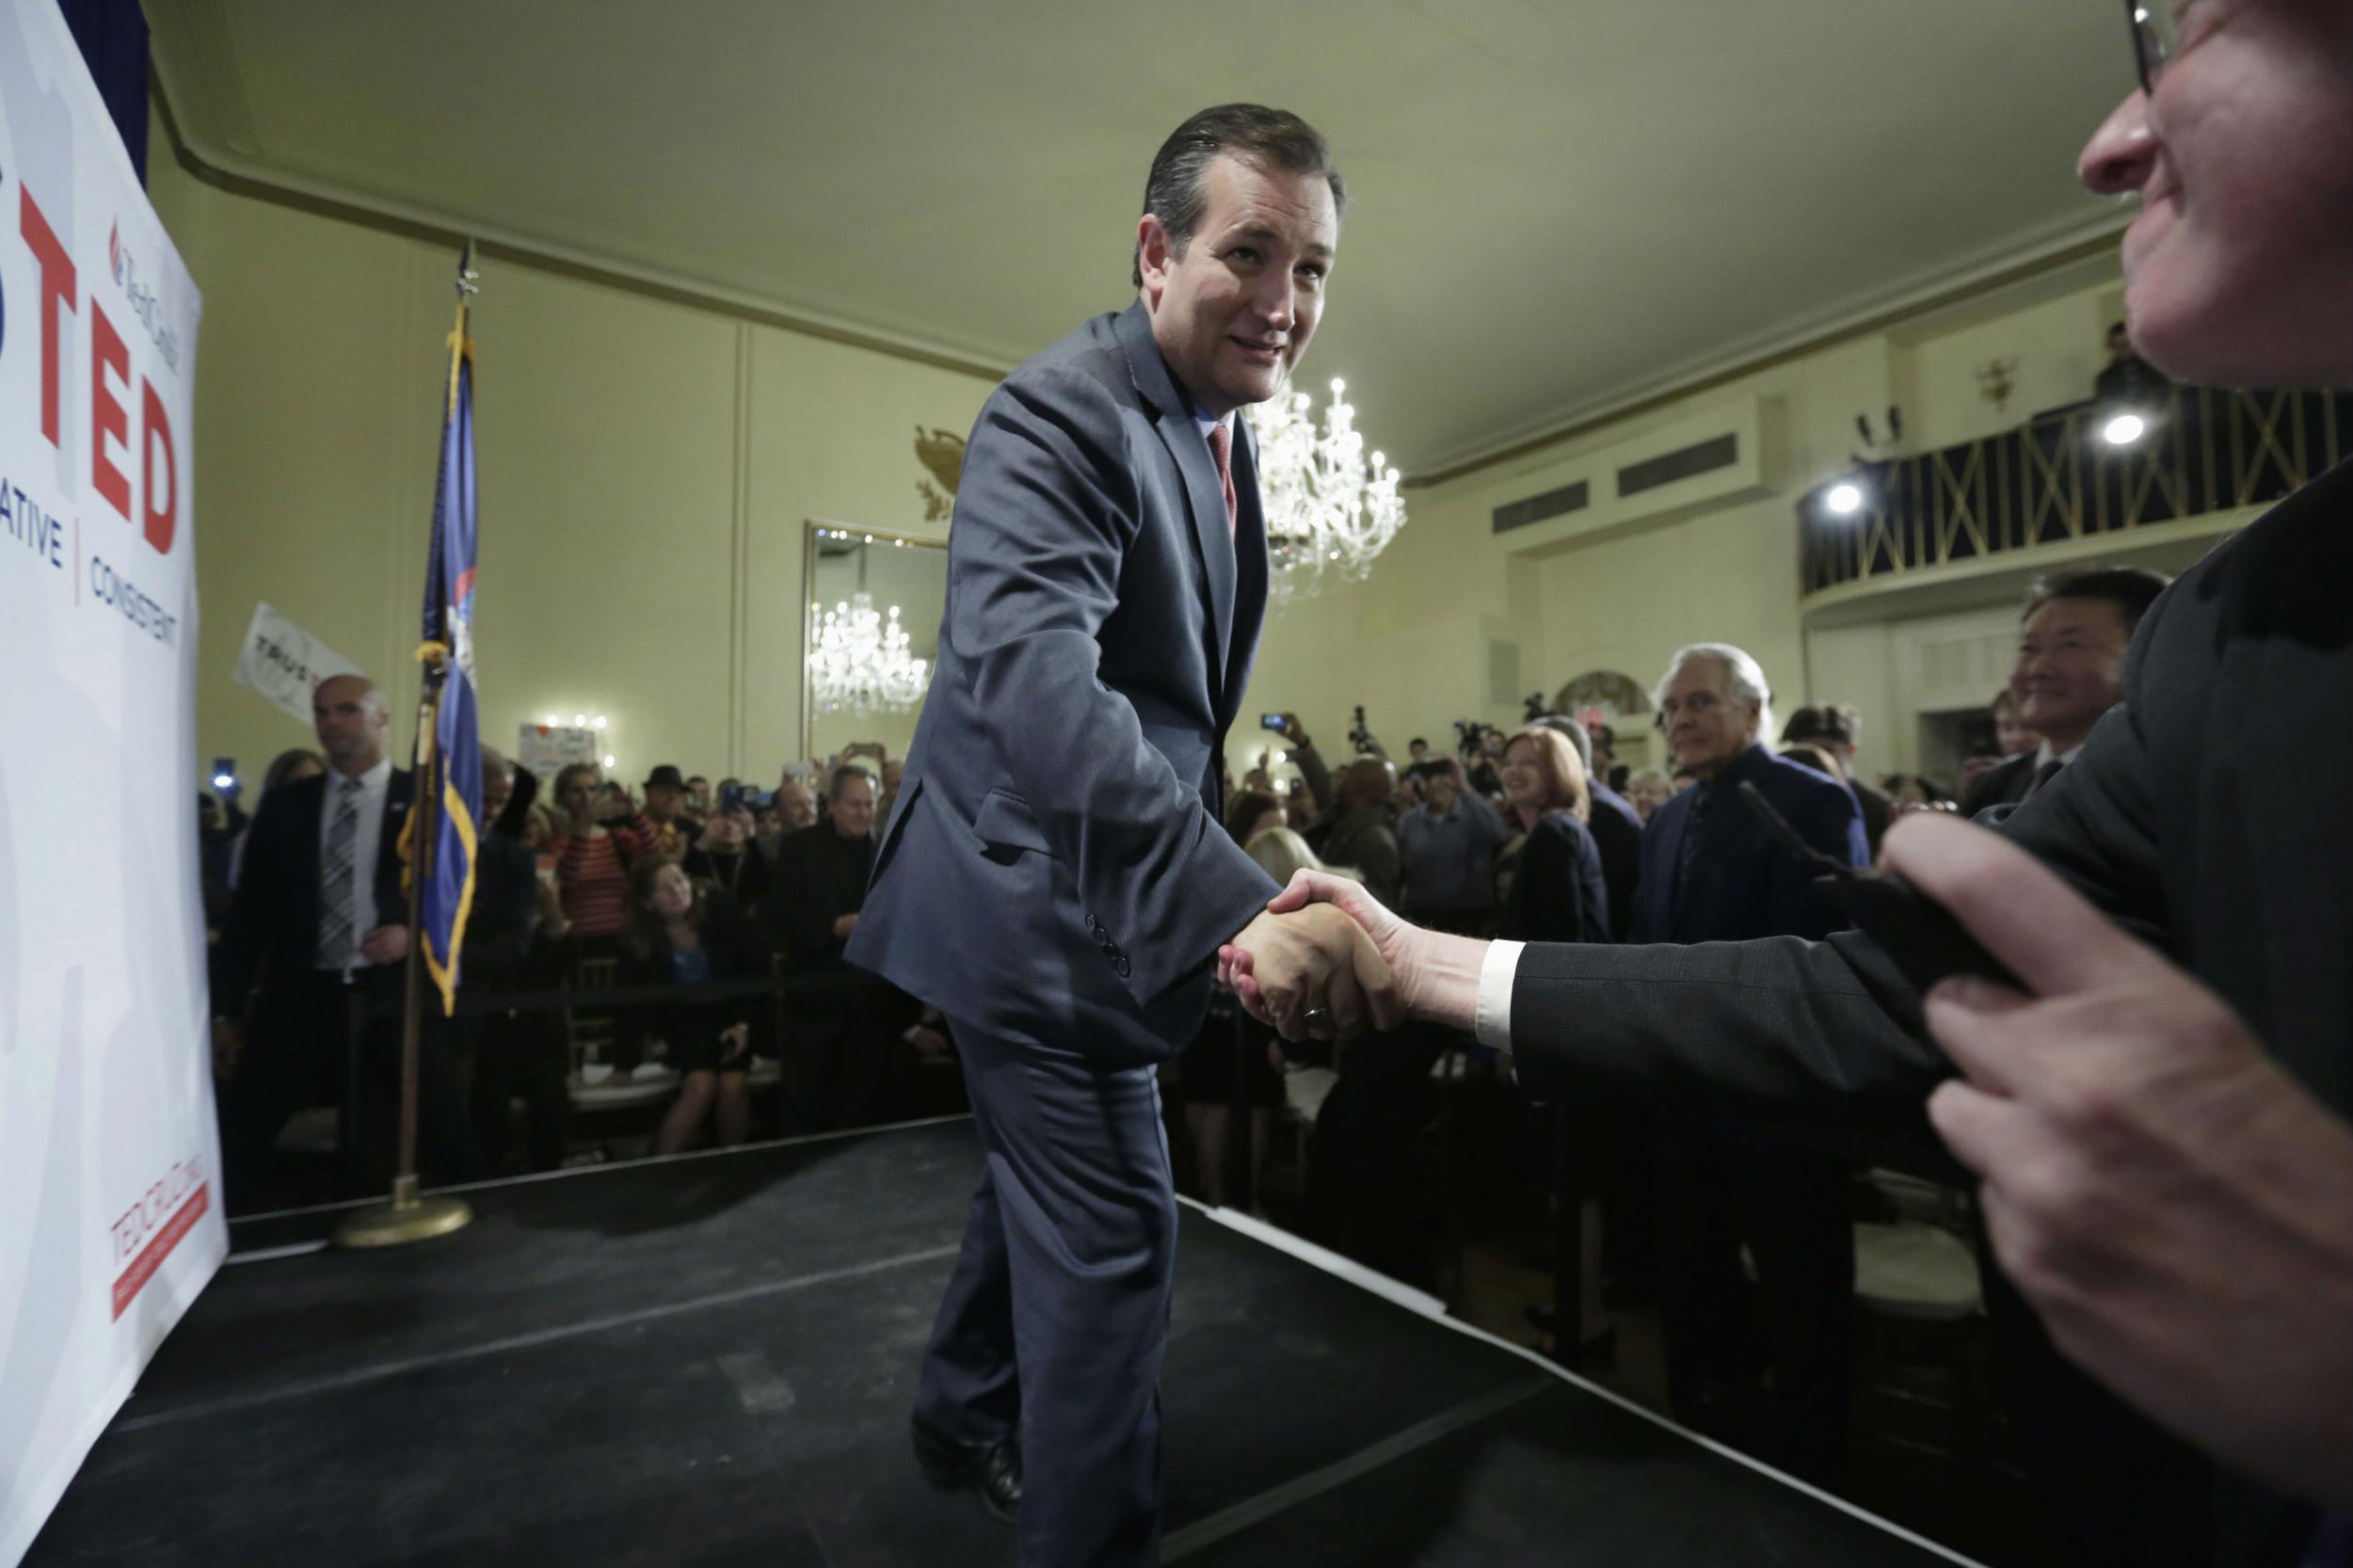 Ted Cruz shakes hands with voters in New York